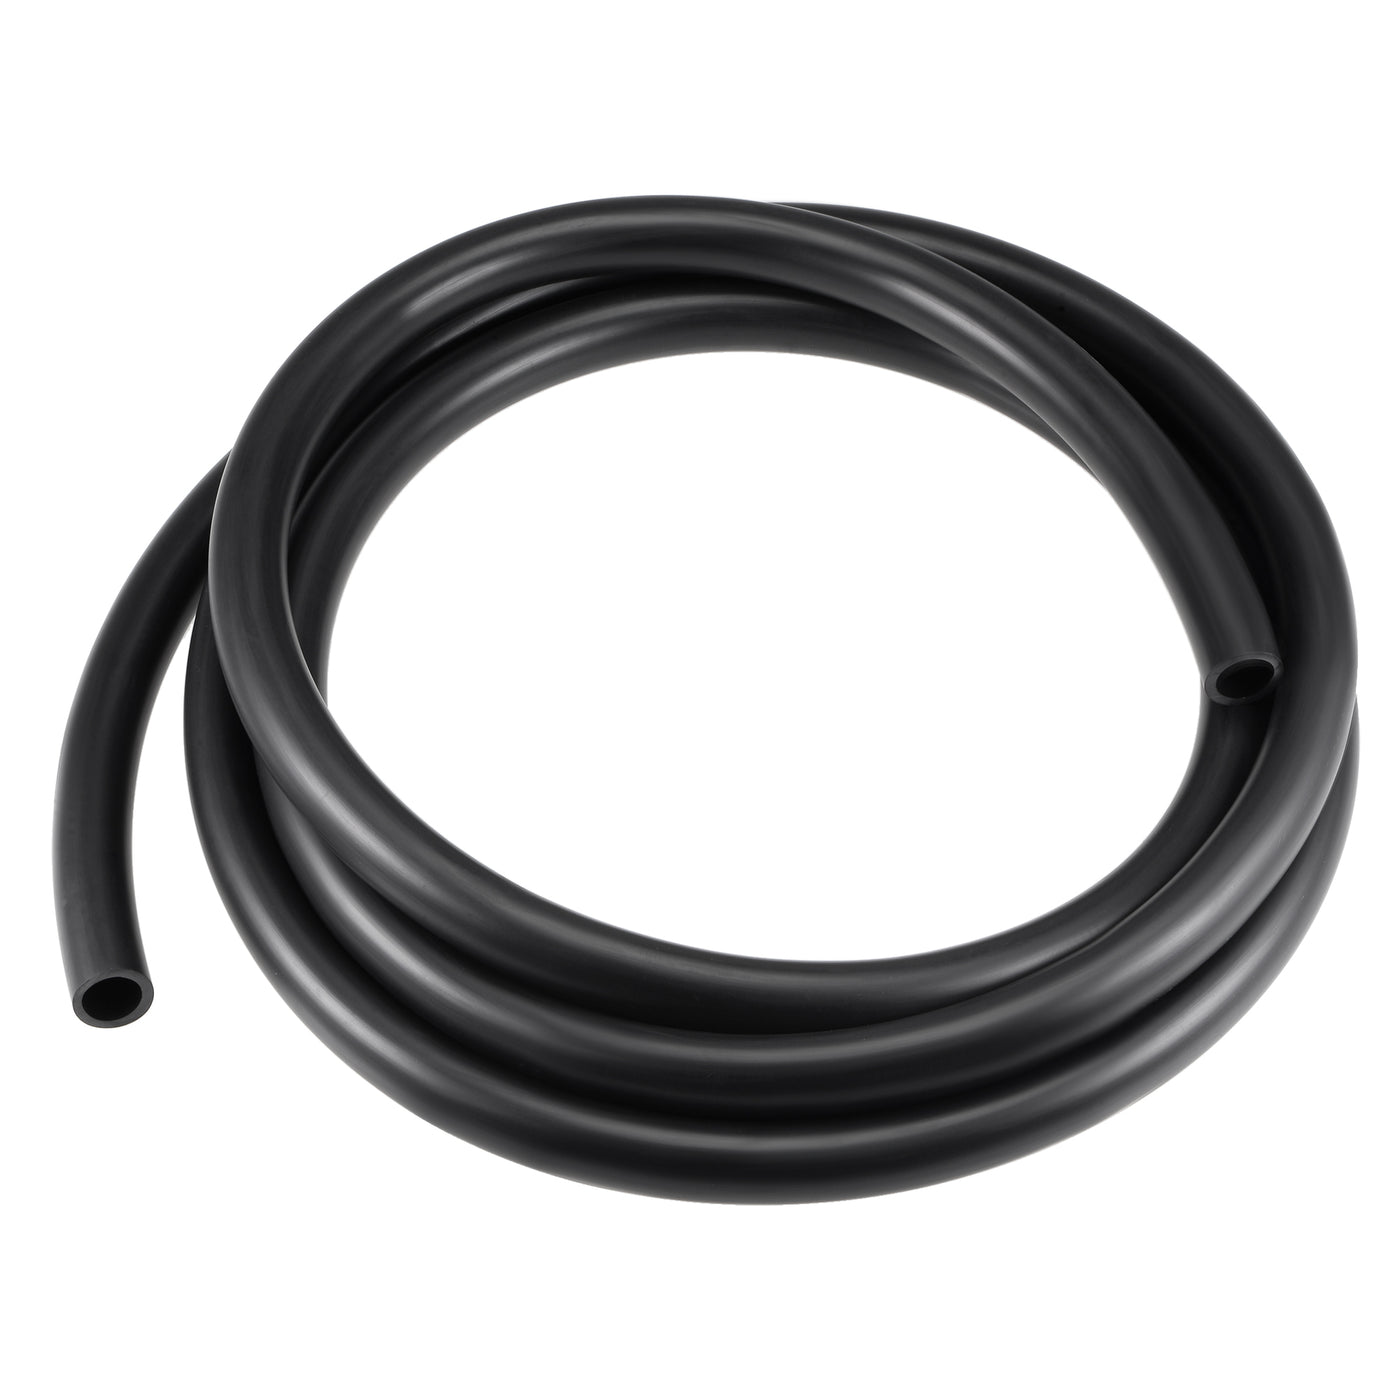 Uxcell Uxcell Fuel Line Hose 15mm ID 20mm OD 10ft Oil Line & Fuel Pipe Rubber Water Hose Black